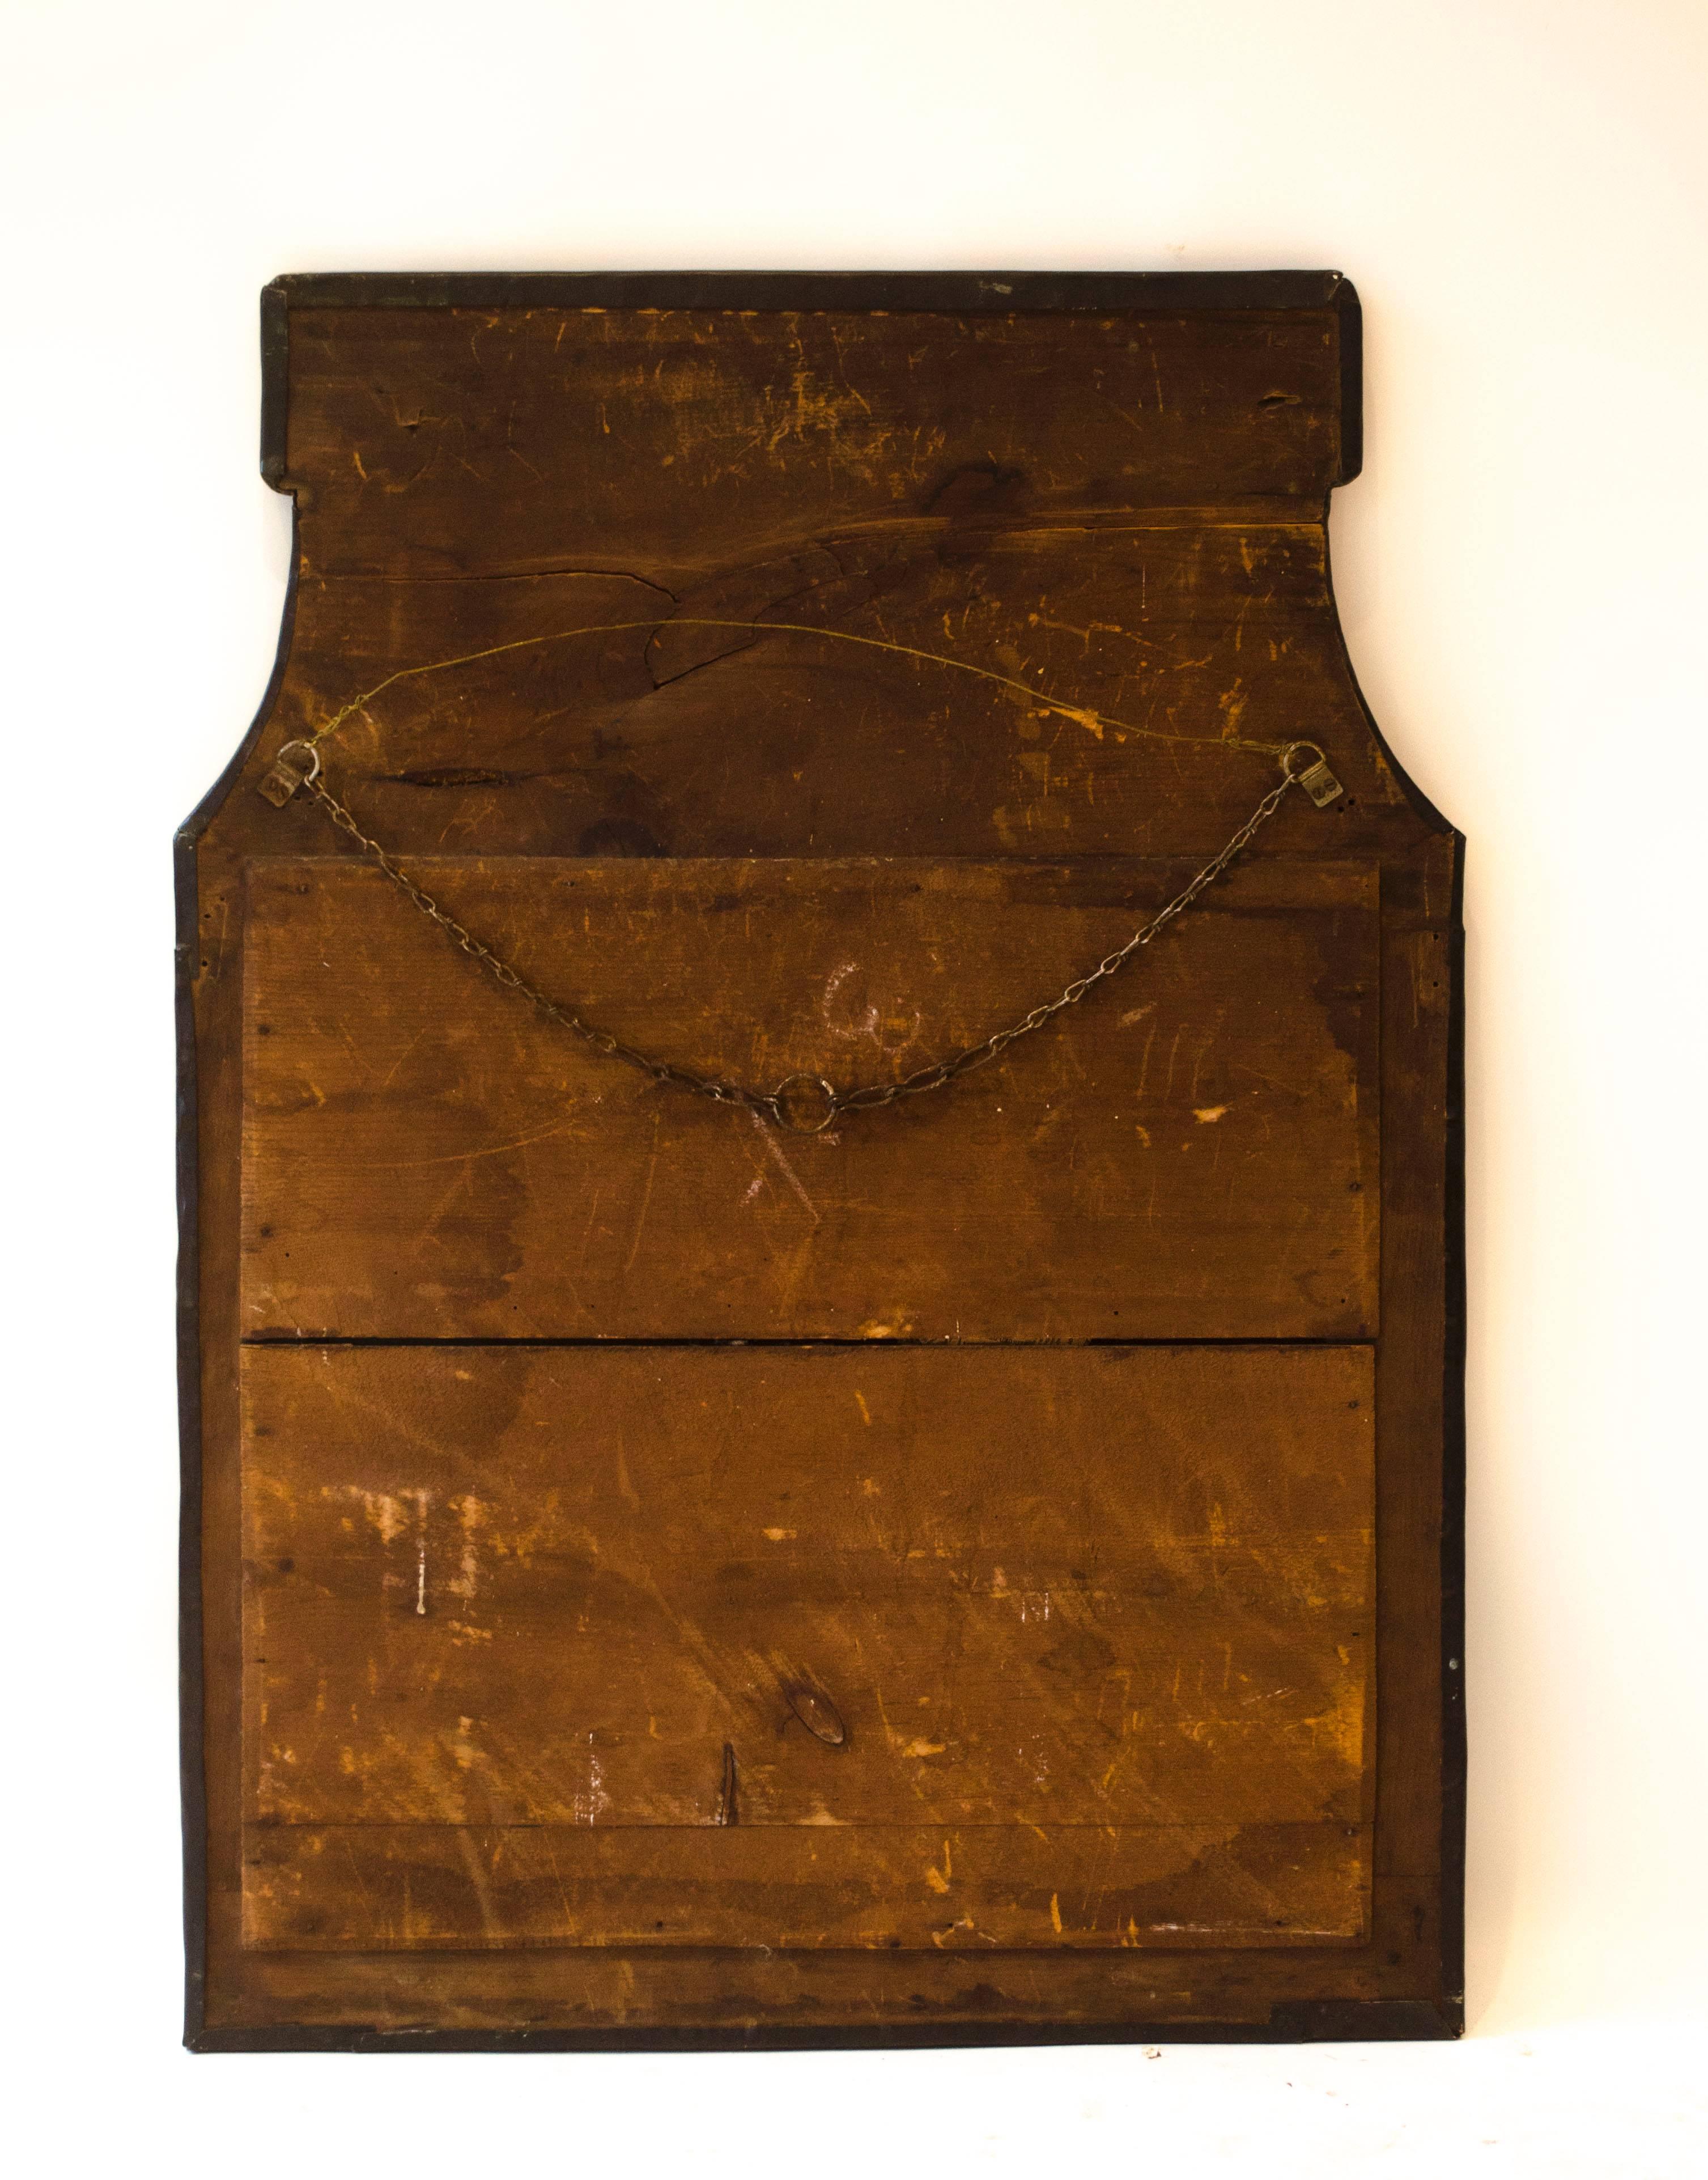 John Pearson, attributed. An exceptional copper mirror with lovely chocolate patina.

Mirror frame, height 33", width 24".
Mirror, 17 1/4" square.
   